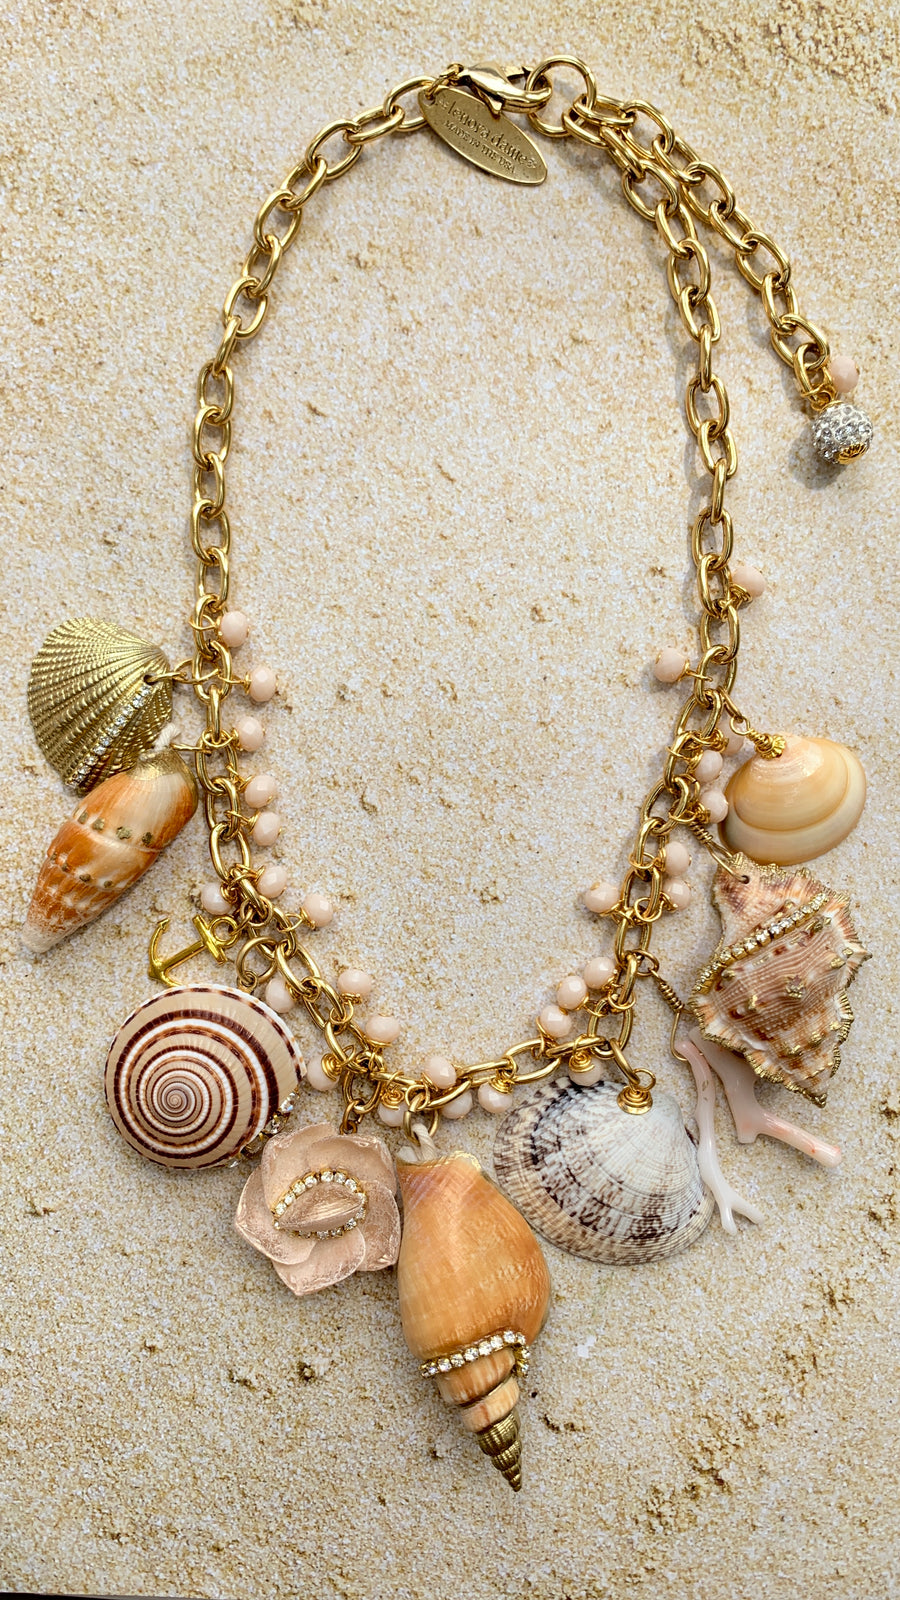 Rhinestone and Seashell Charm Necklace - One-of-a-Kind